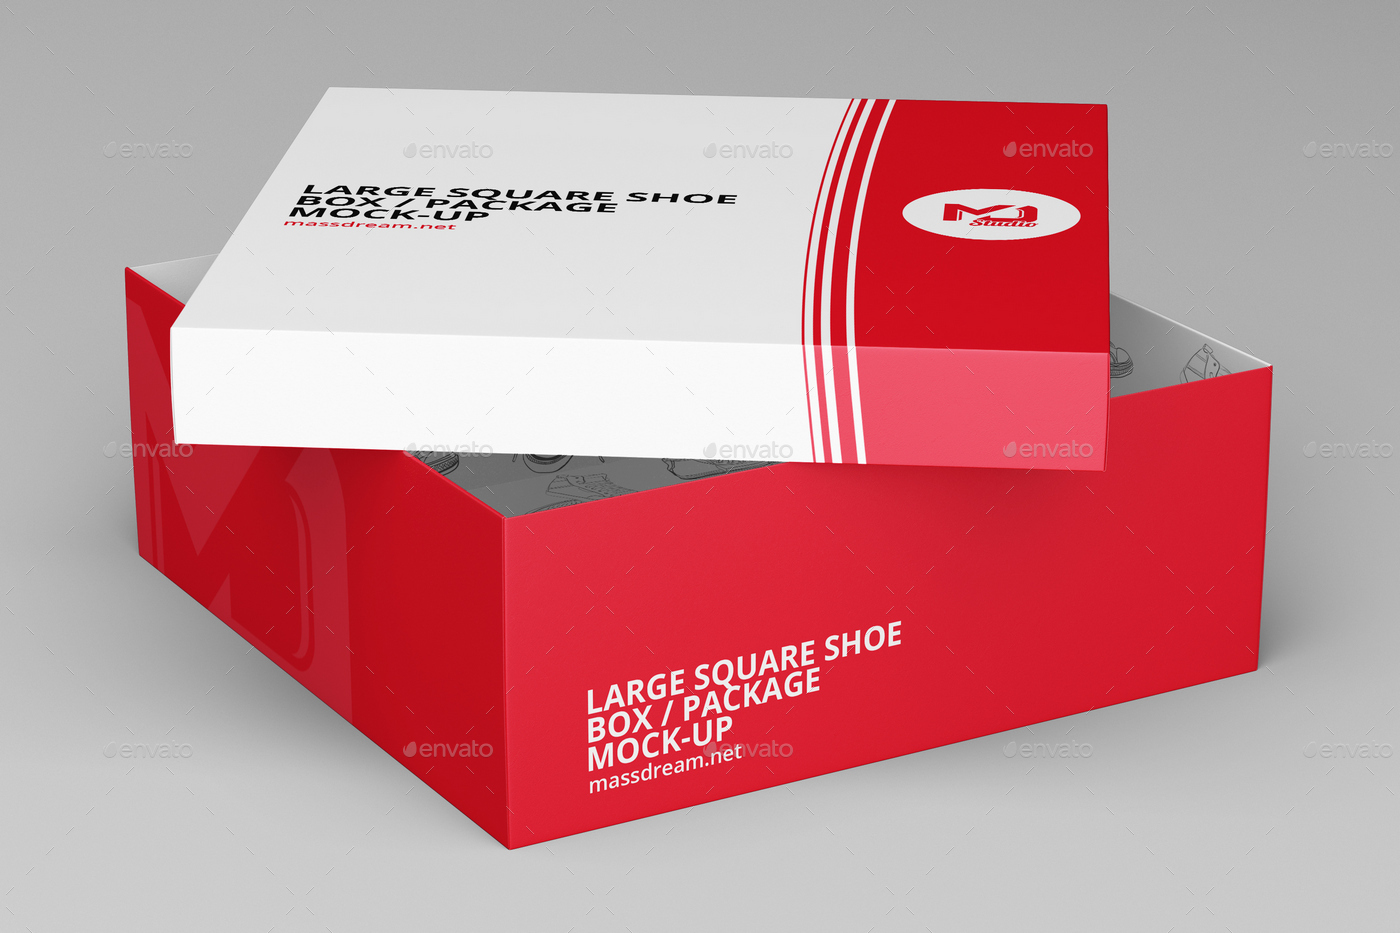 Download Large Square Shoe Box / Package Mock-Up by MassDream ...